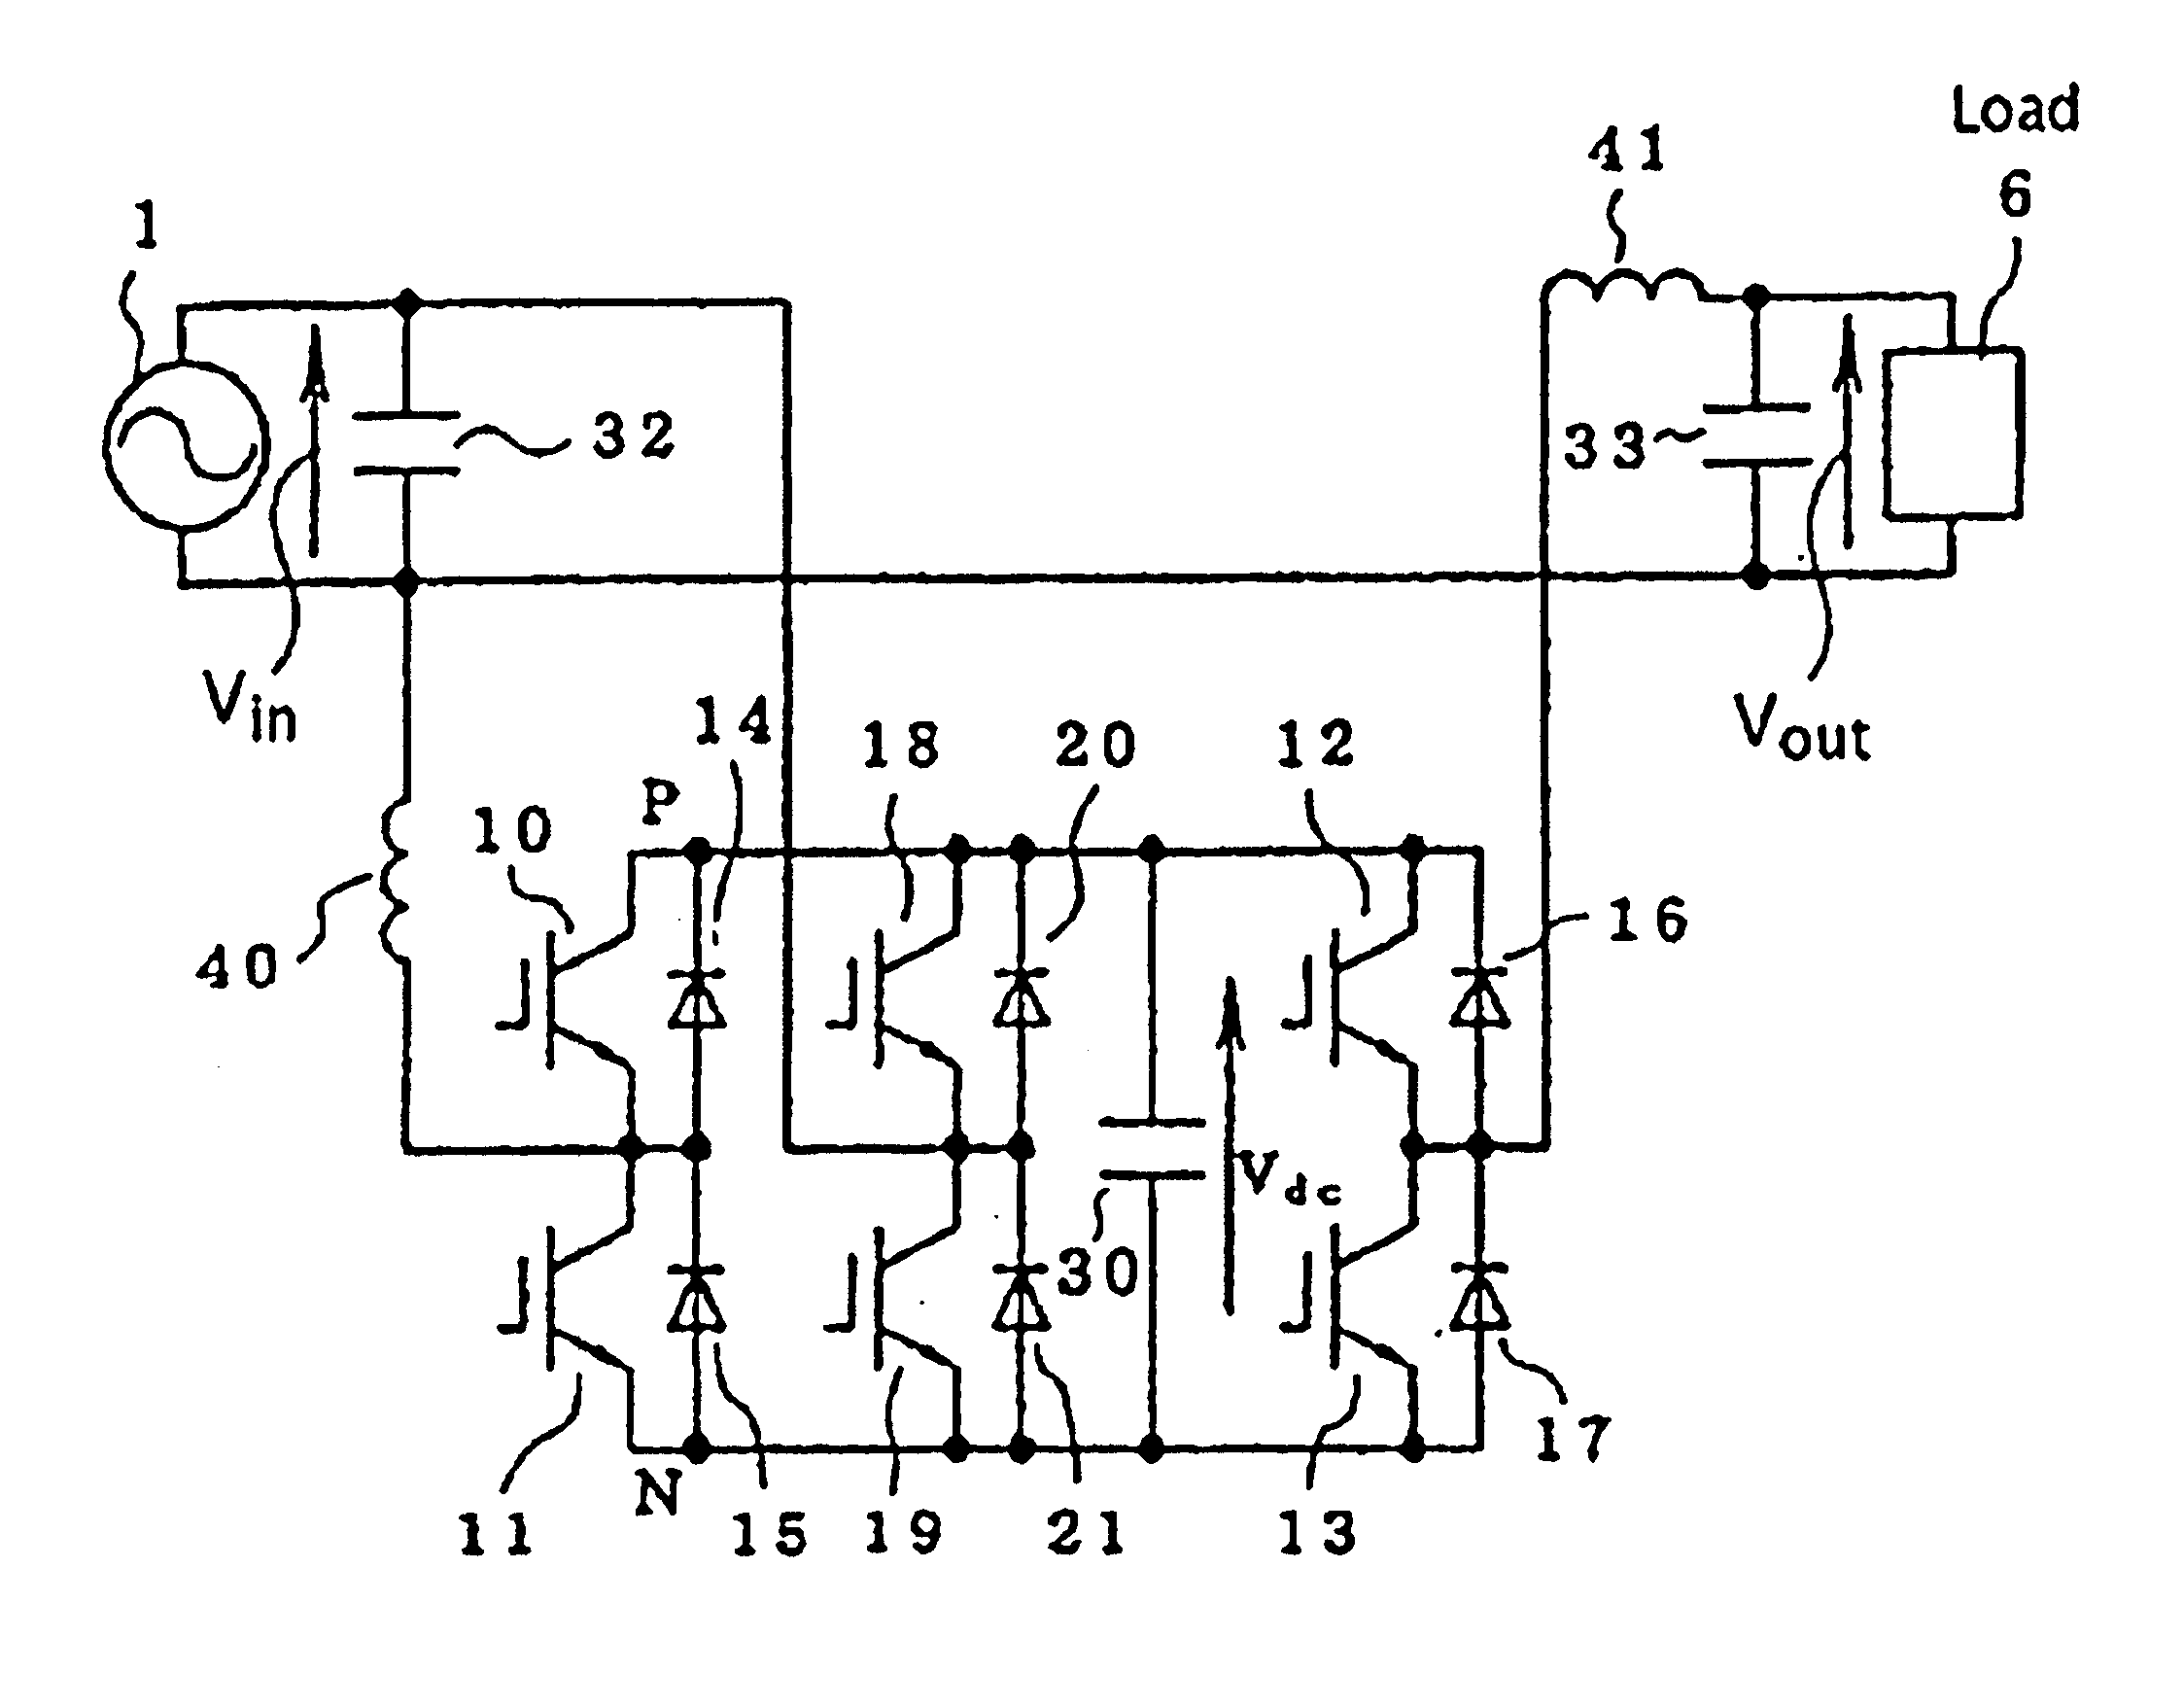 Electric power converting device